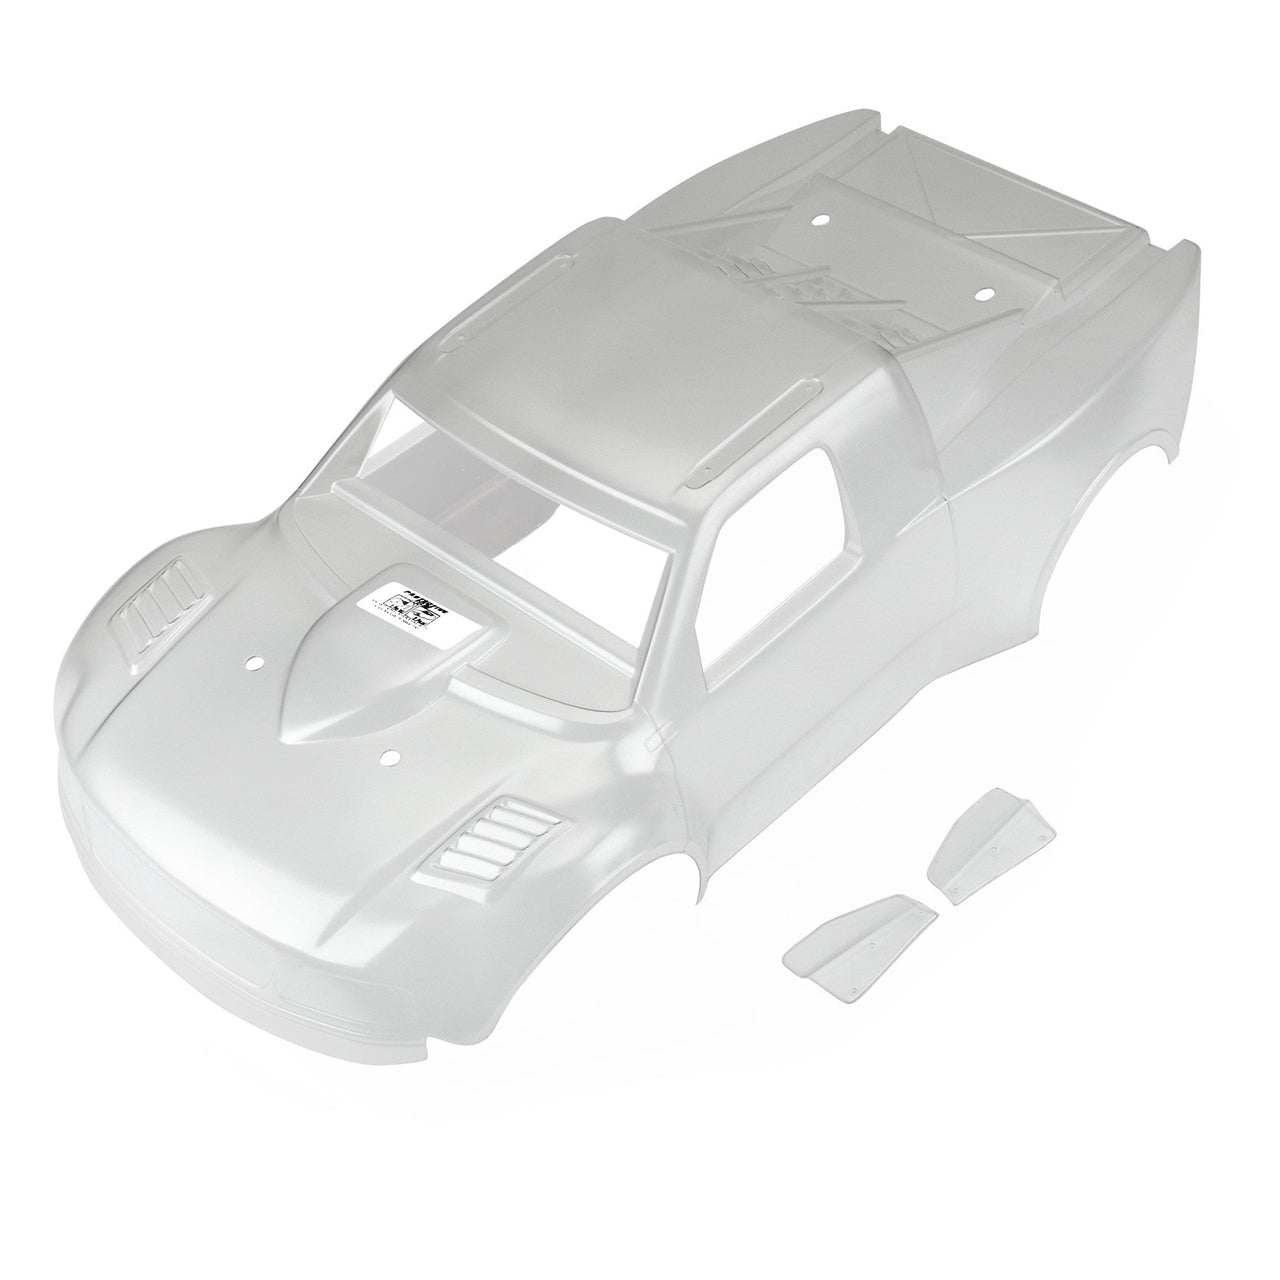 PRO361817 1/7 Pre-Cut 1997 Ford F-150 Trophy Truck Clear Body: Mojave 6S